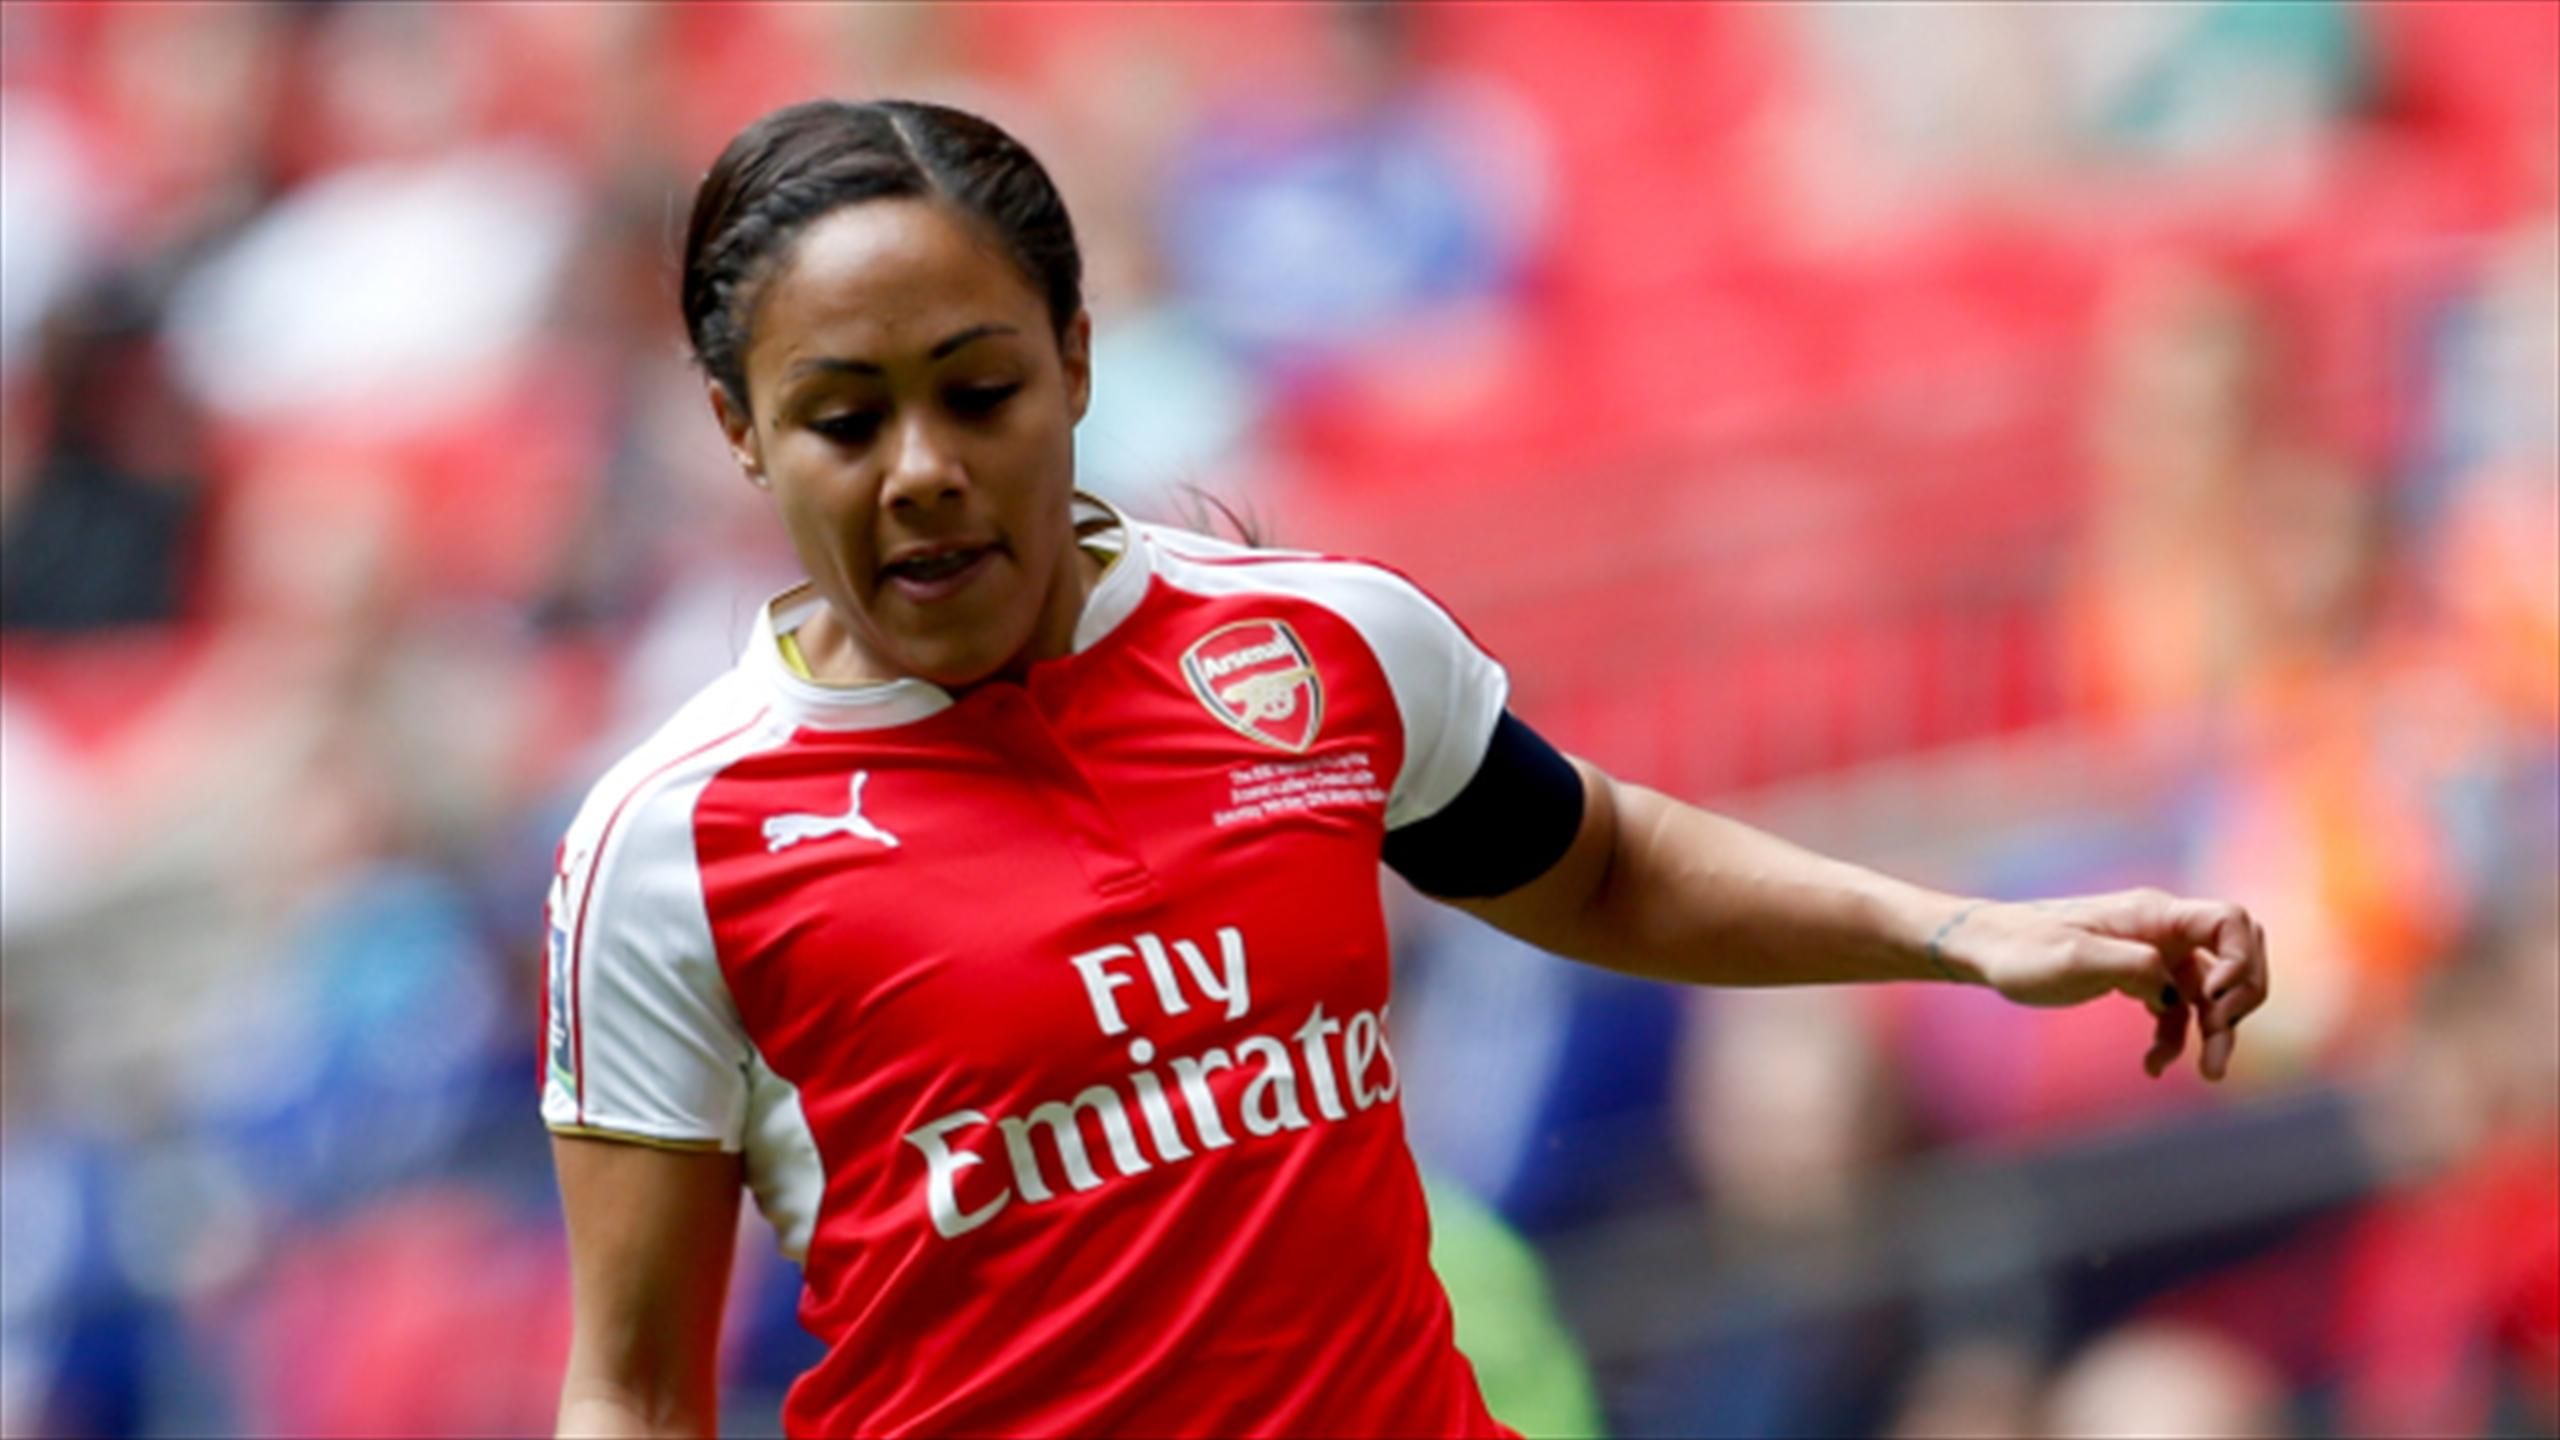 Arsenal drop 'Ladies' reference from women's team in 'progressive